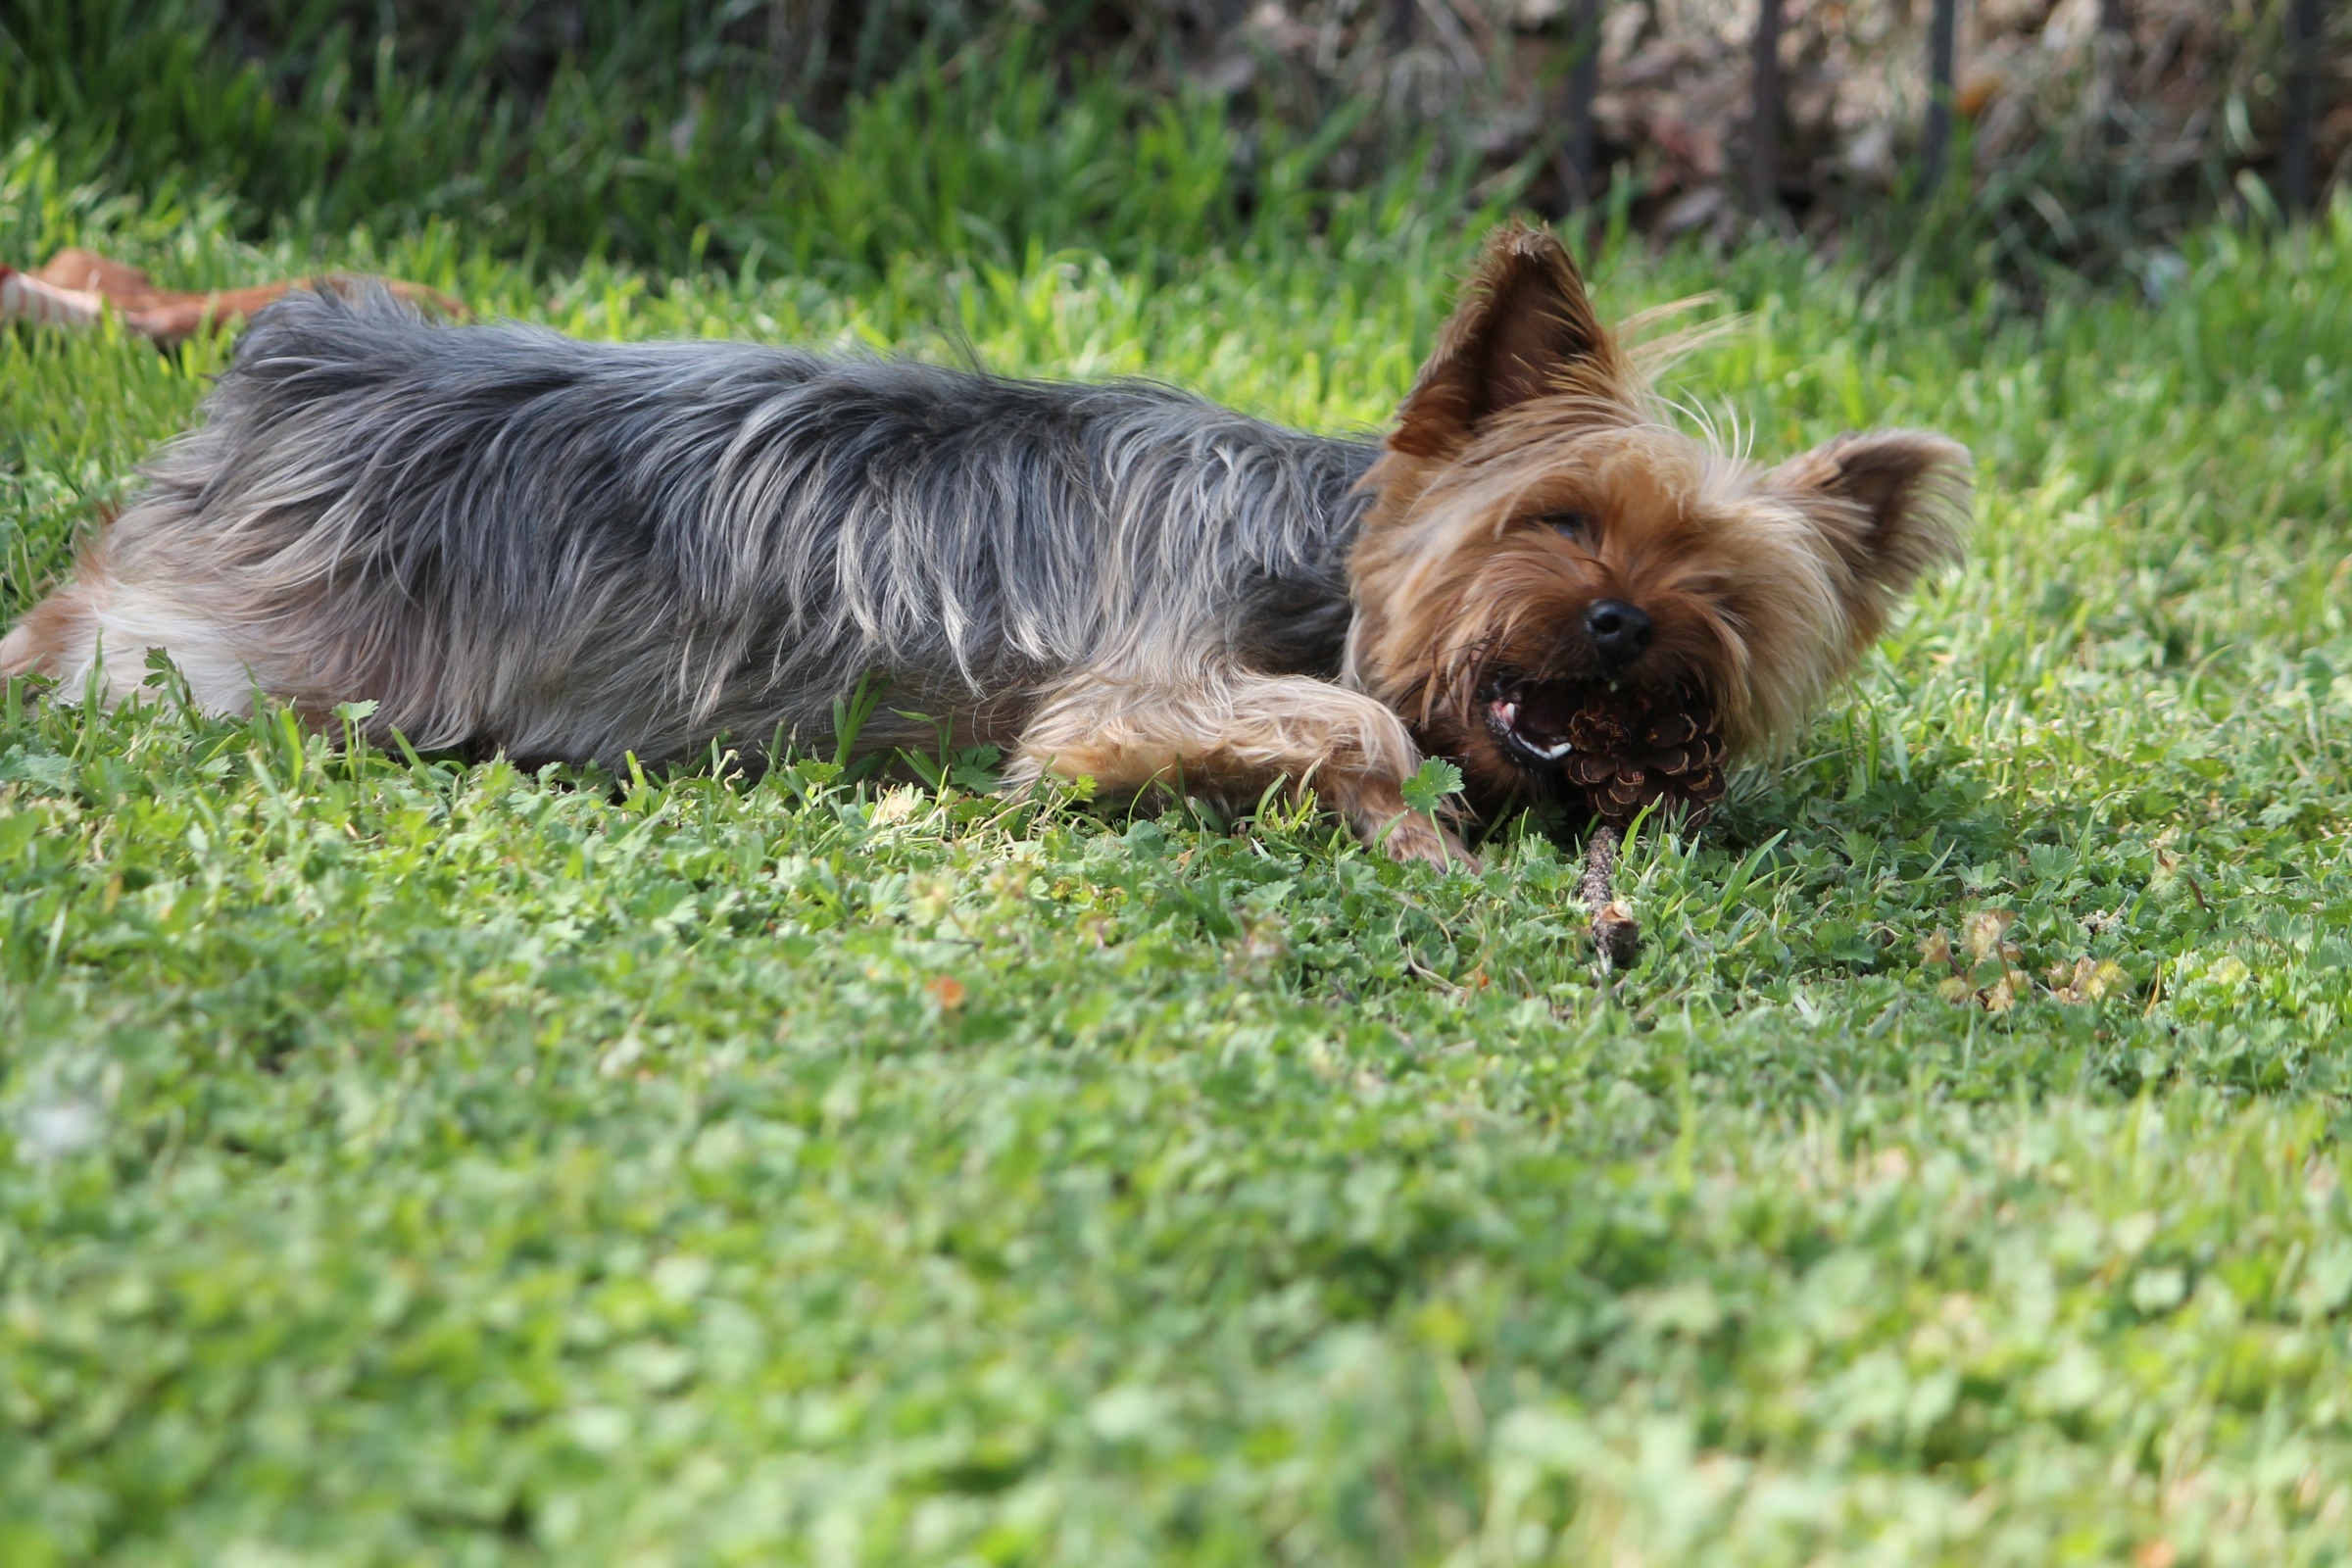 A Lesson in Perseverance … From a Yorkie